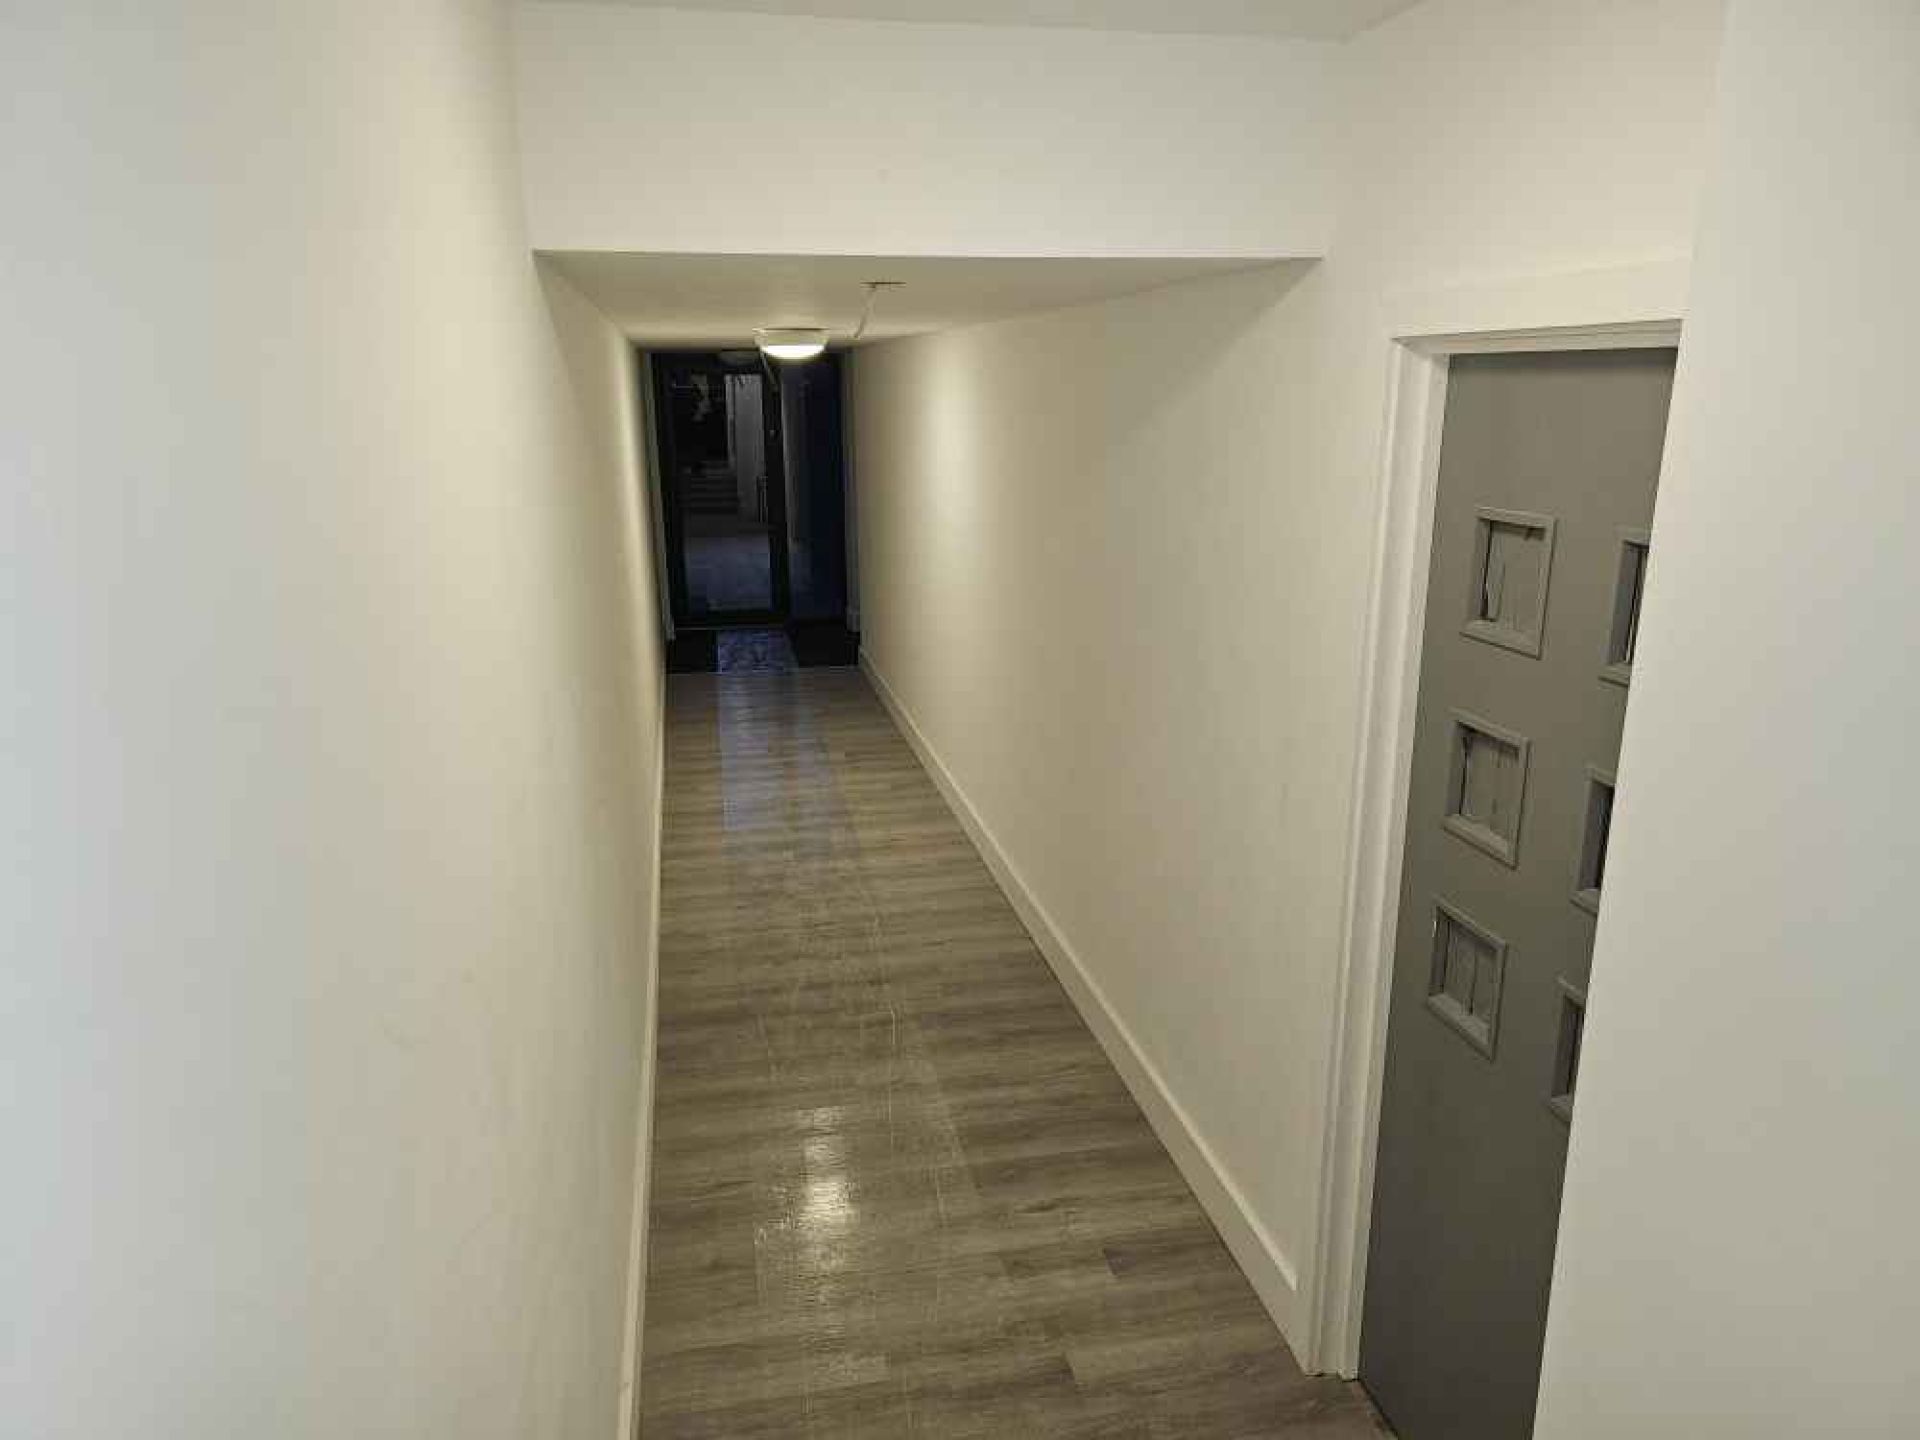 Completed hallway at pegs lane flat development with grey front door.